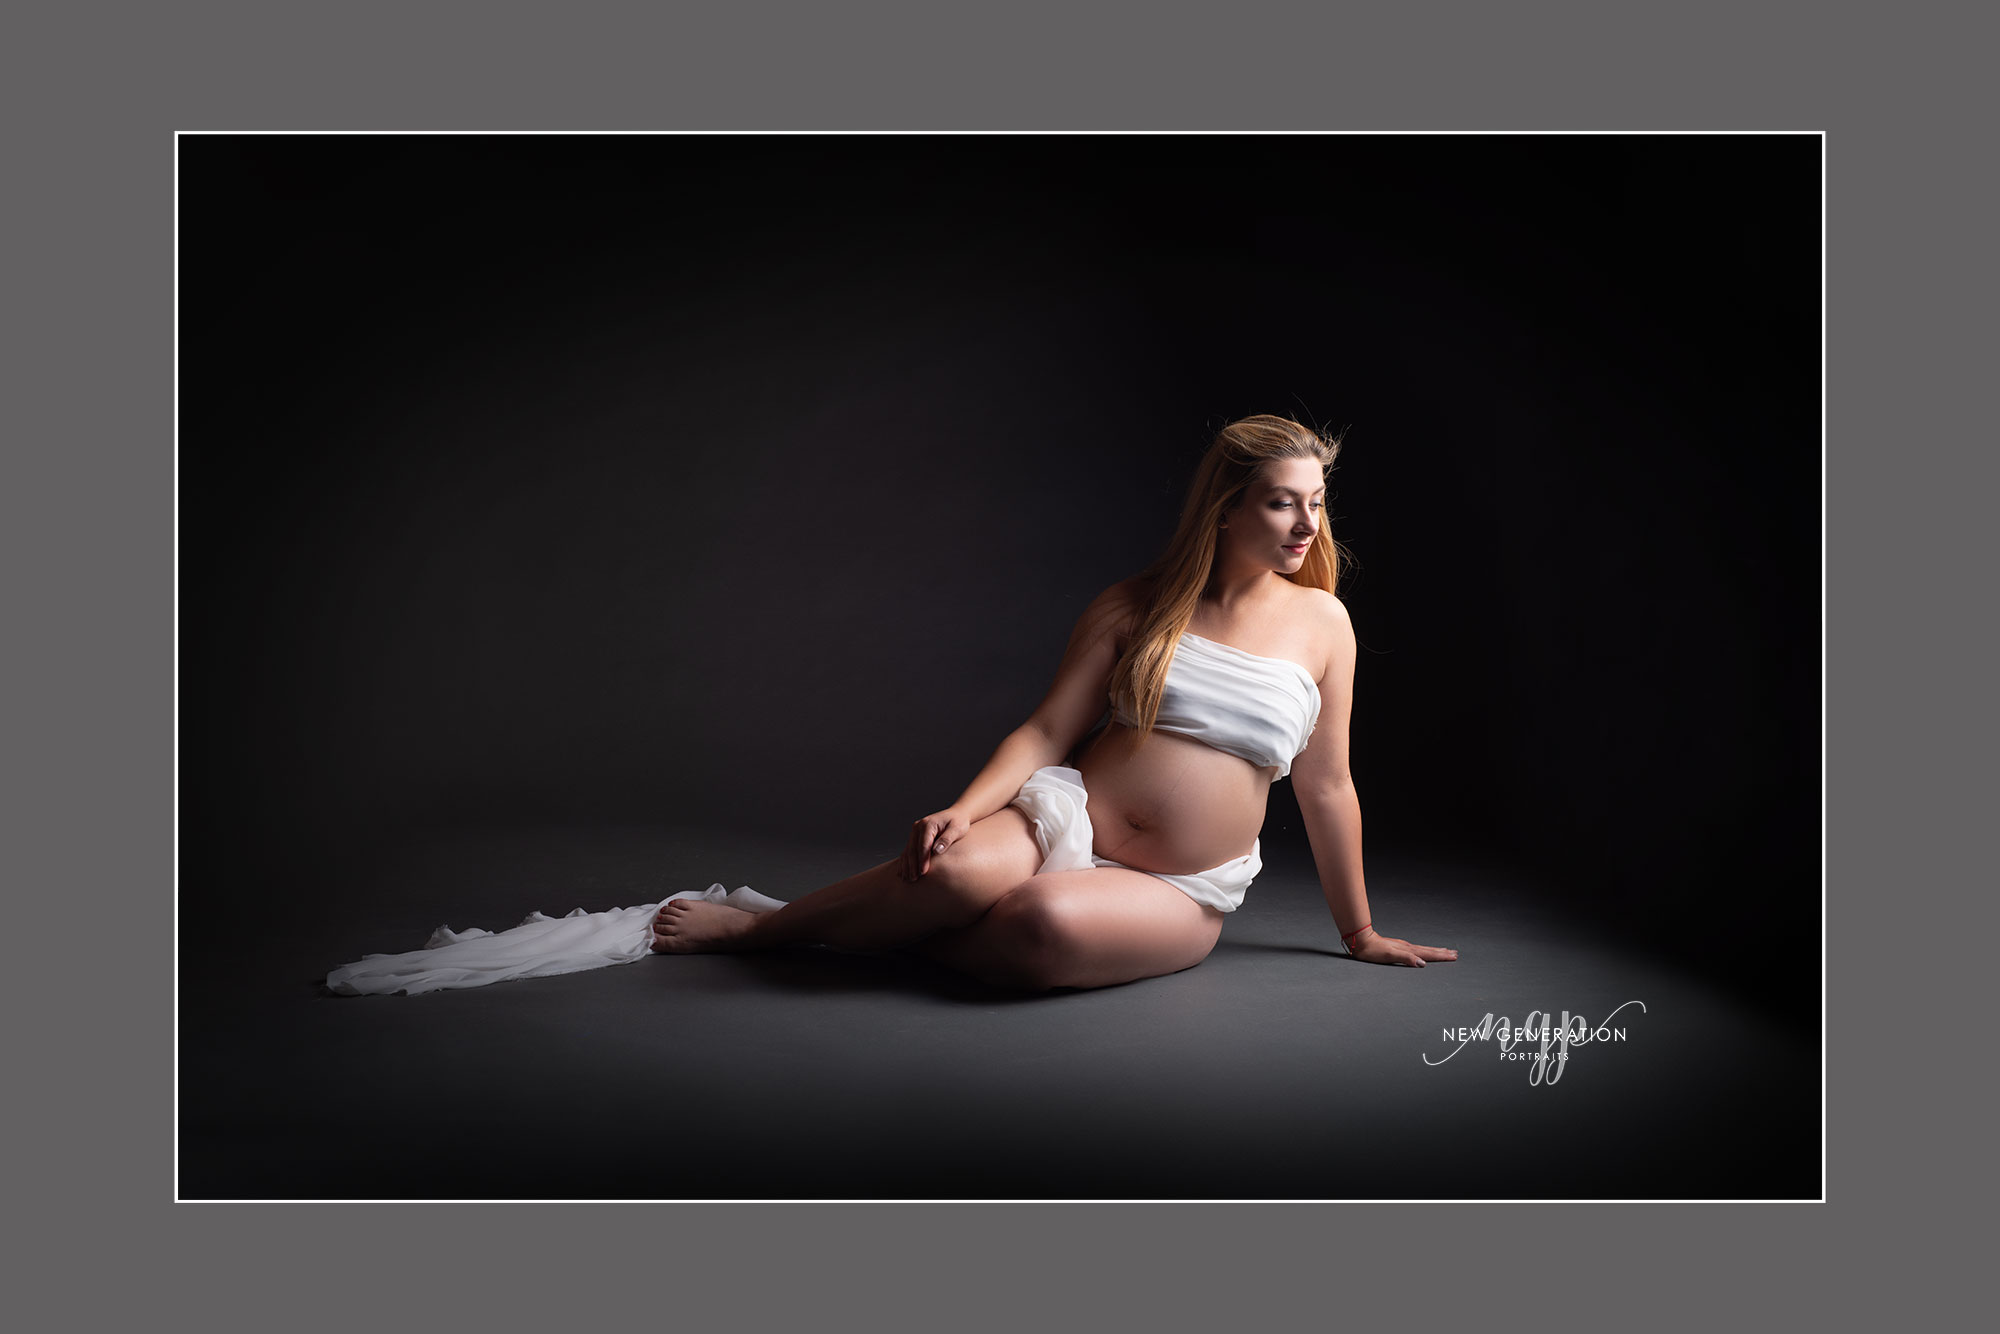 Pregnant lady sat on the floor with white fabric around her. Captured by New Generation Portraits.